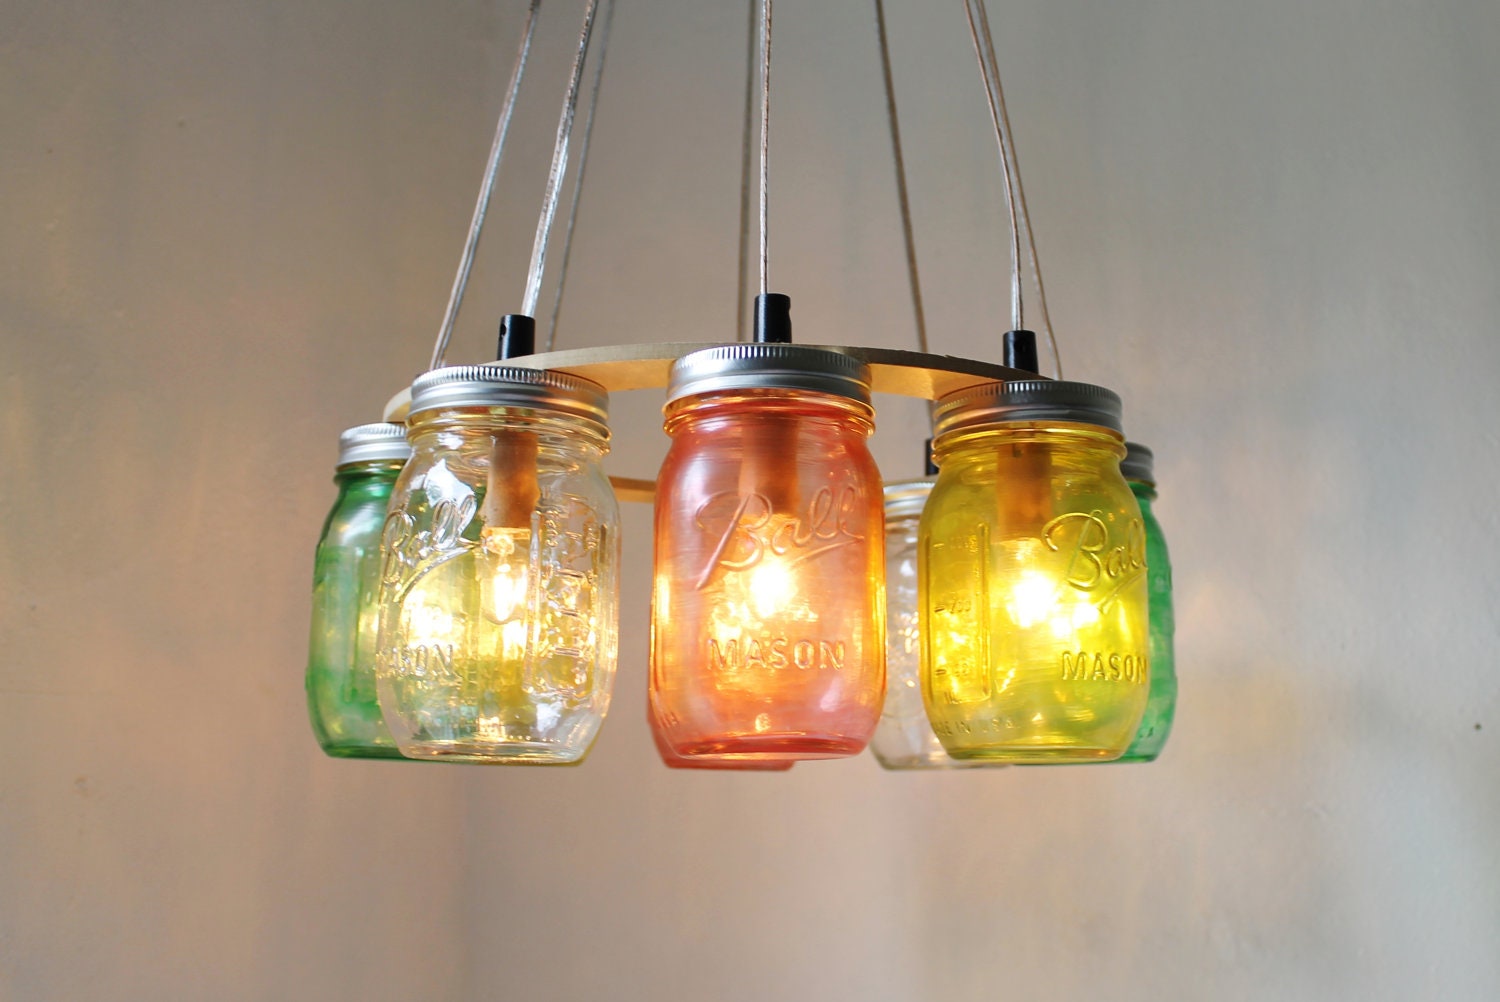 Tropical Fruit Mason Jar Chandelier - Upcycled Hanging Mason Jar Lighting Fixture Direct Hardwire - BootsNGus Lamps Rustic Home Decor